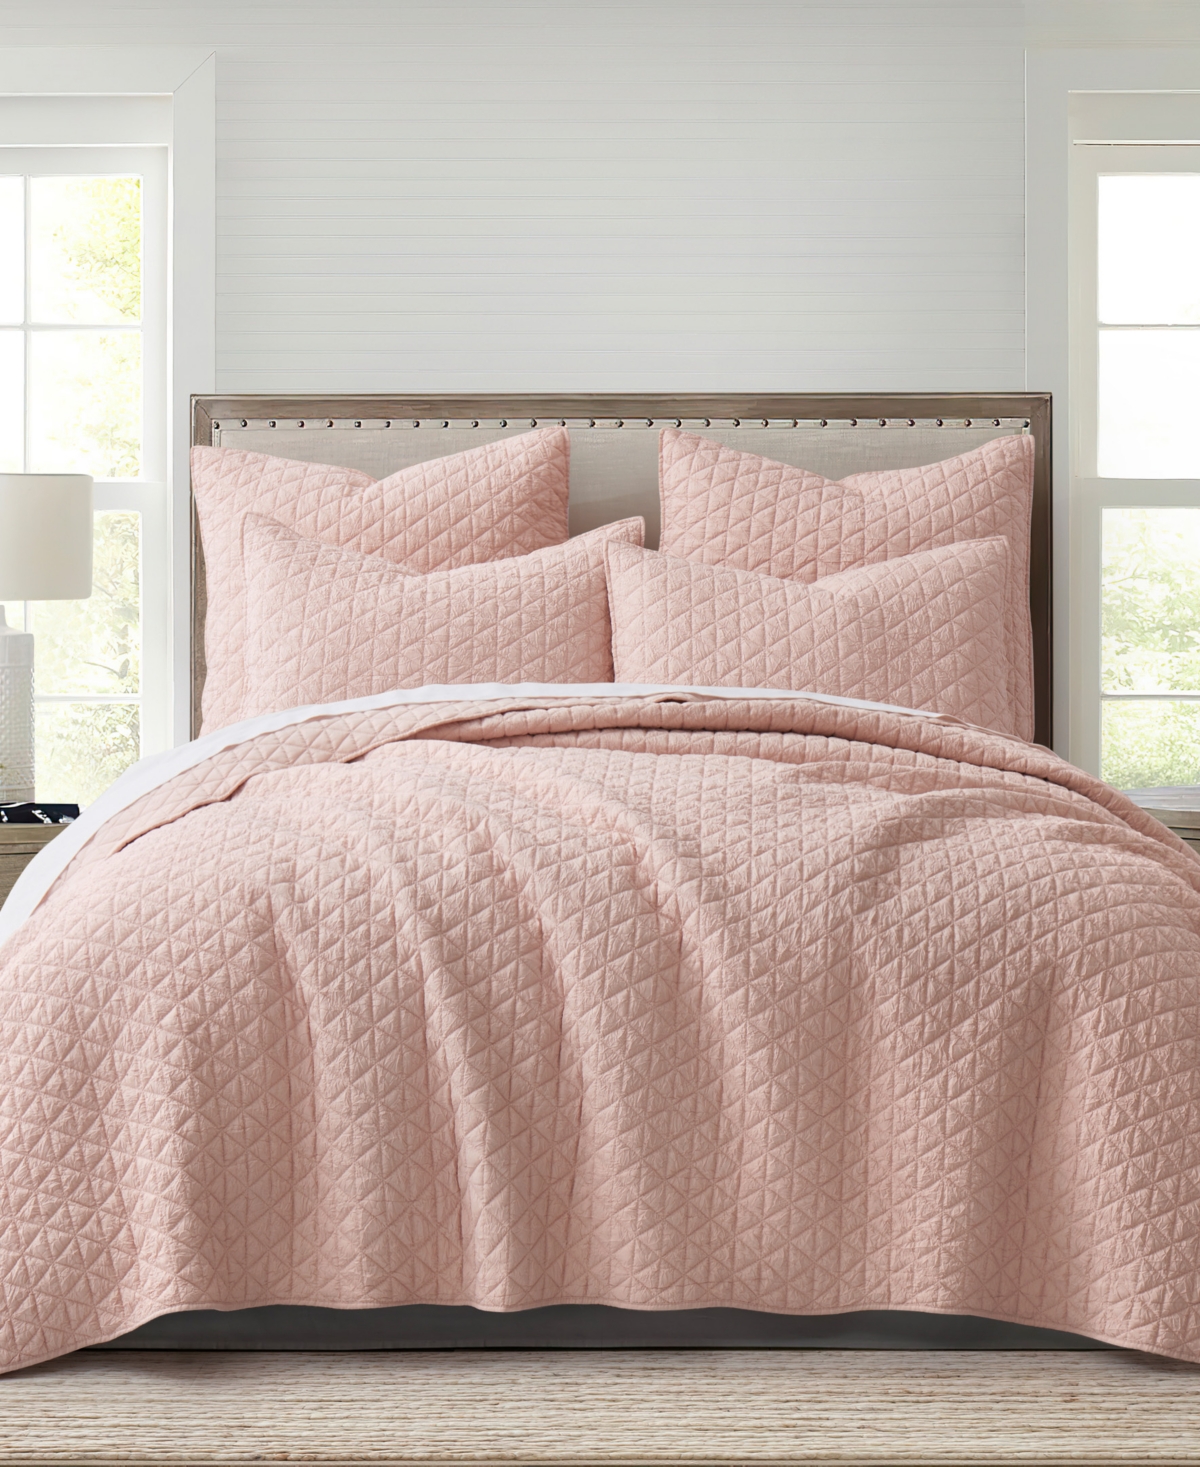 Levtex Homthreads Rowan Enzyme Wash 2-pc. Quilt Set, Twin/twin Xl In Pink